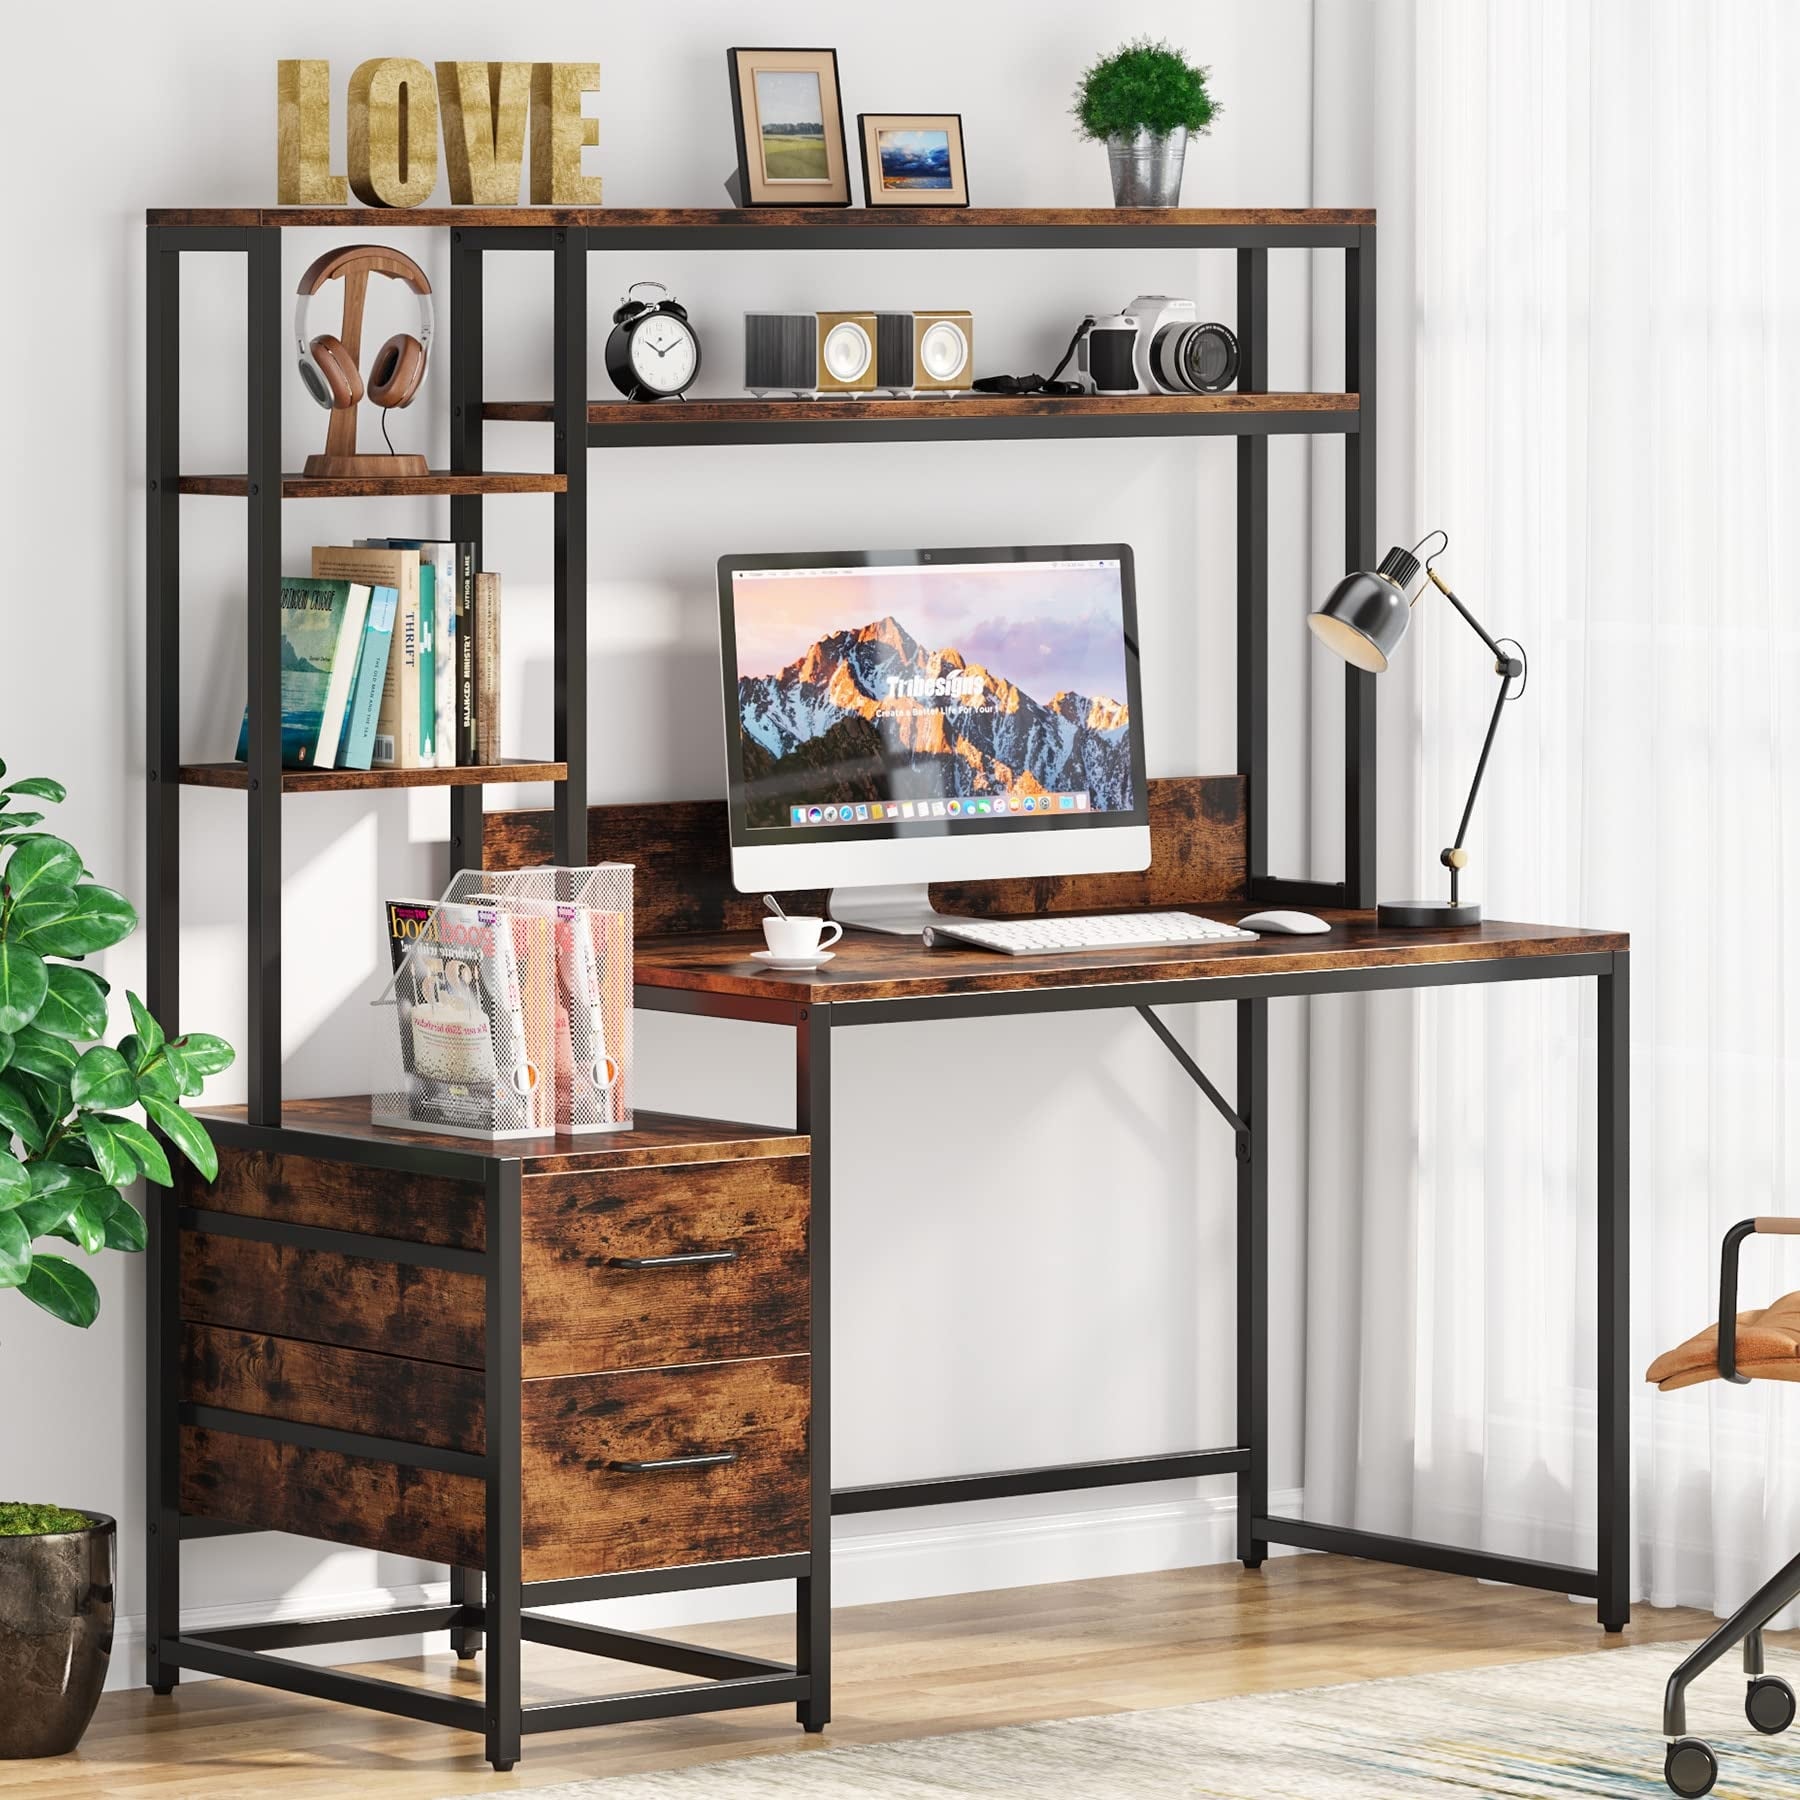 Tribesigns 70'' Computer Desk with Storage Shelves